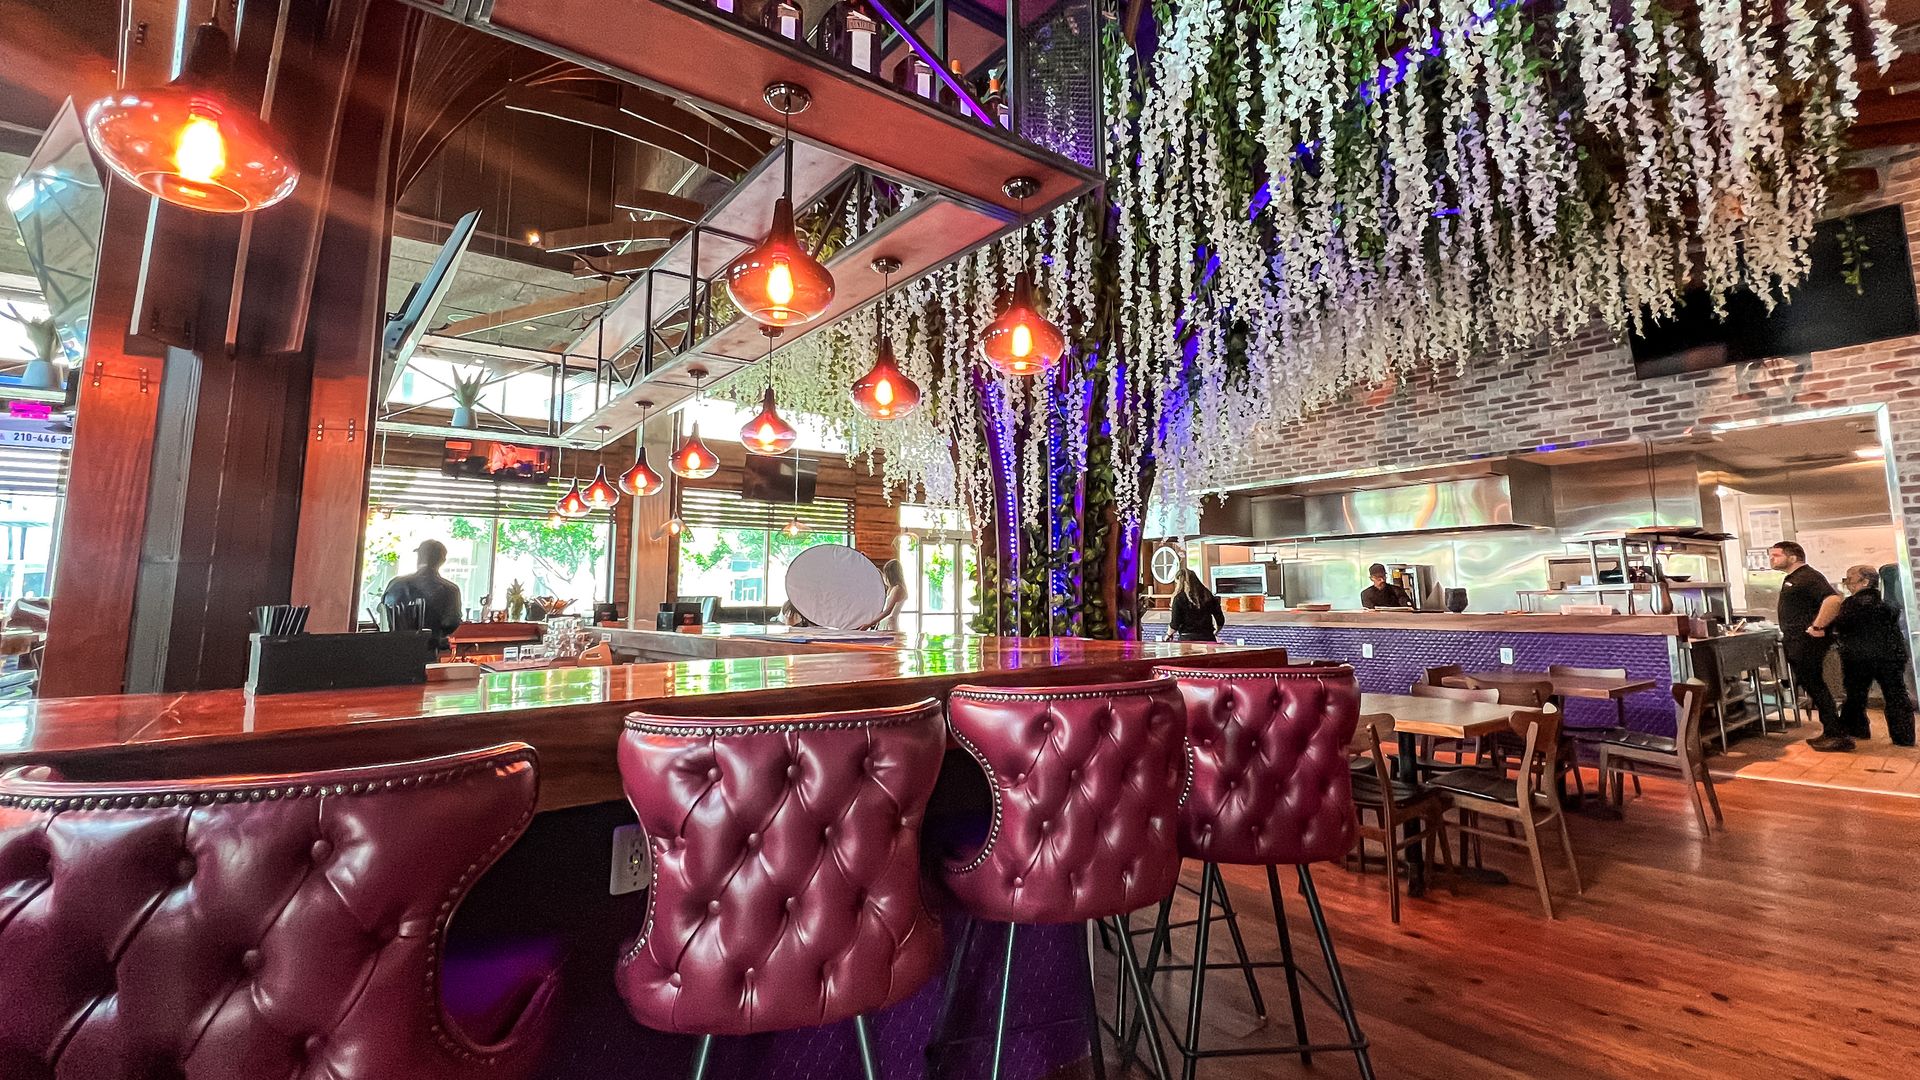 A bar with red leather high-top seats and a purple and white ceiling artwork hanging down.